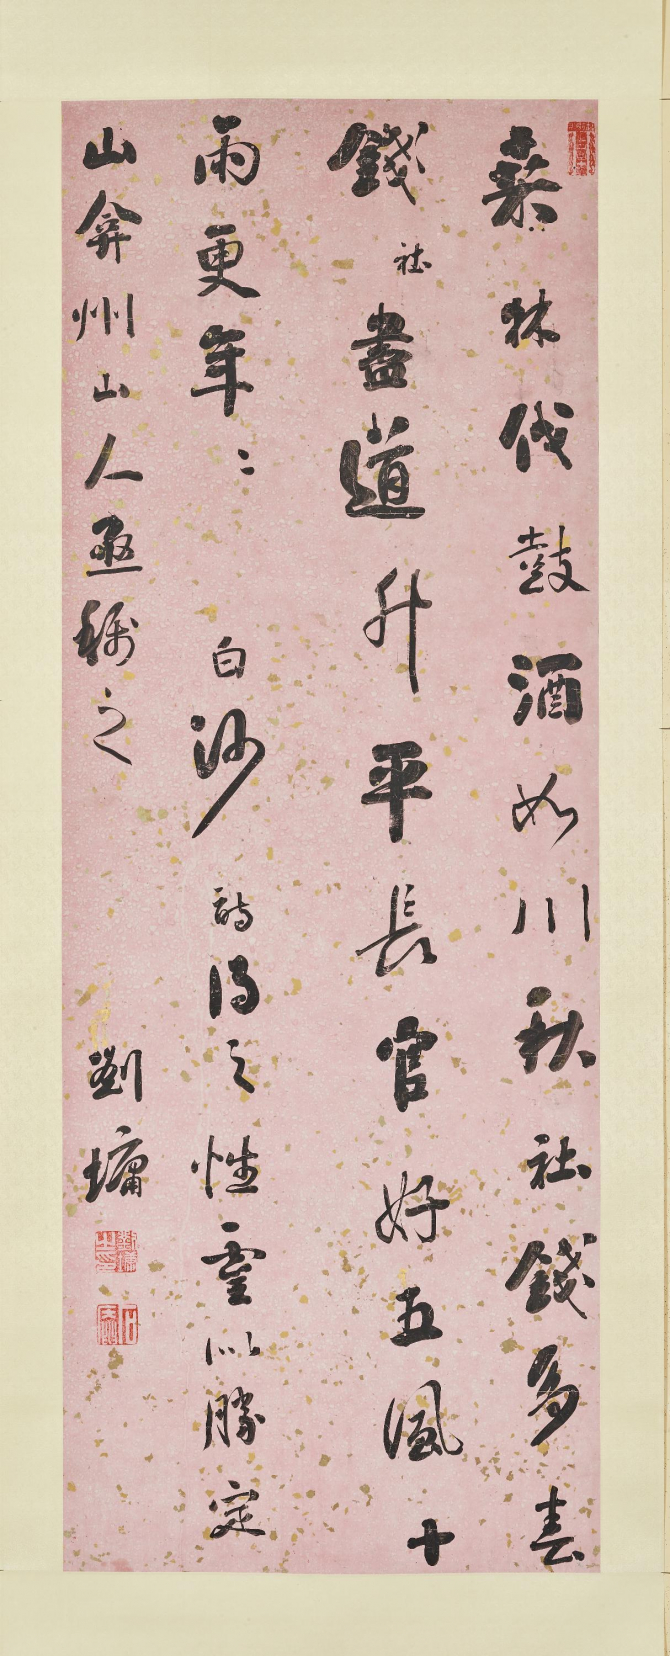 Image of "Poem in Running and Cursive Script"